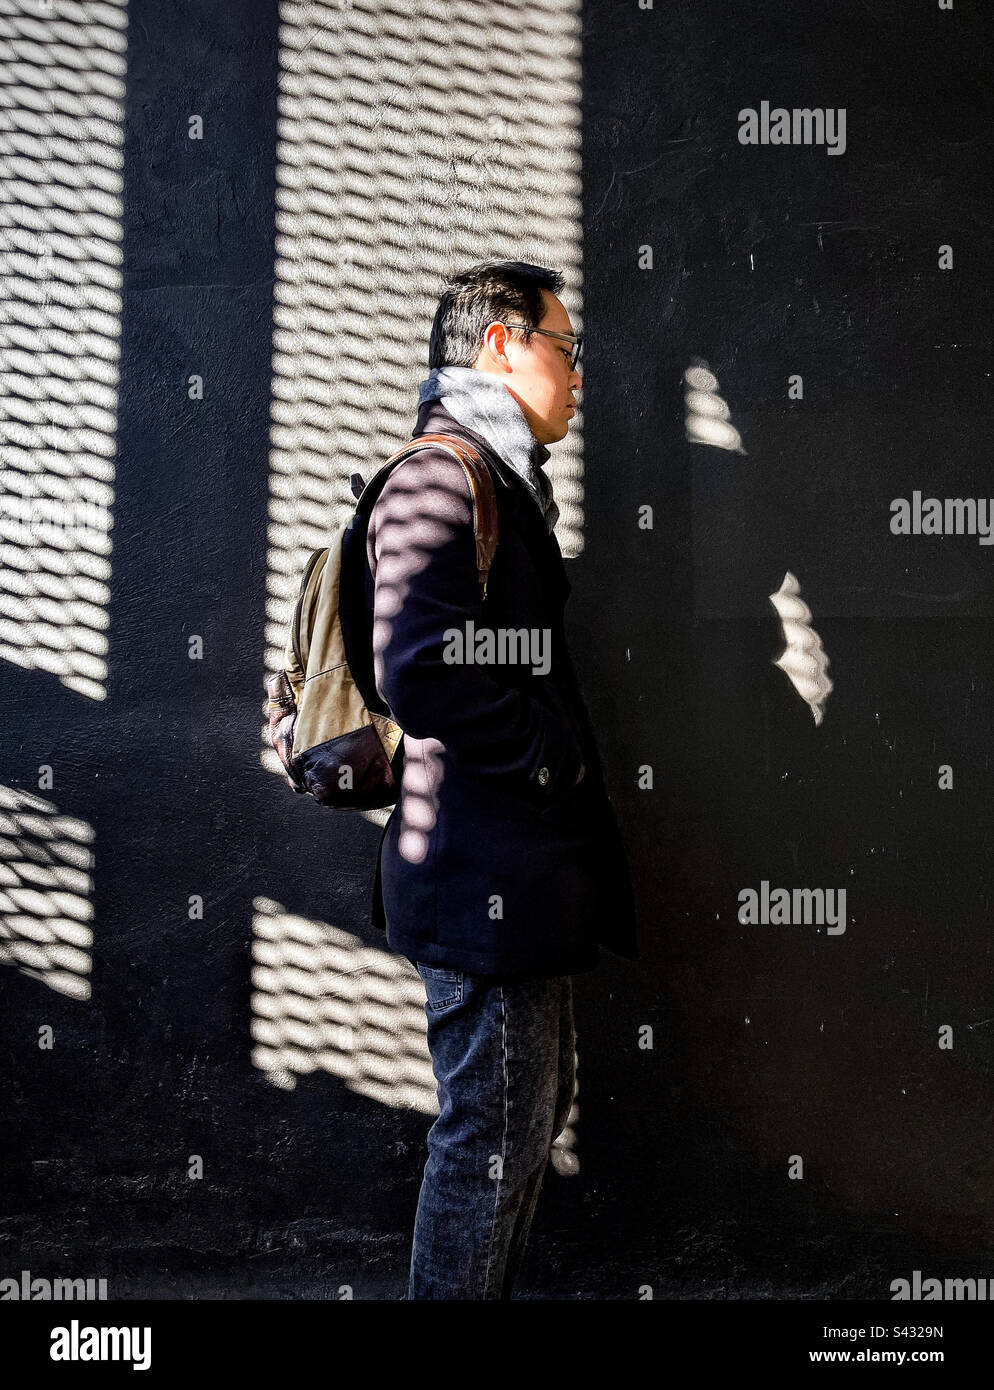 Three quarter length shot of side view of young man standing against shadow patterned wall. Stock Photo